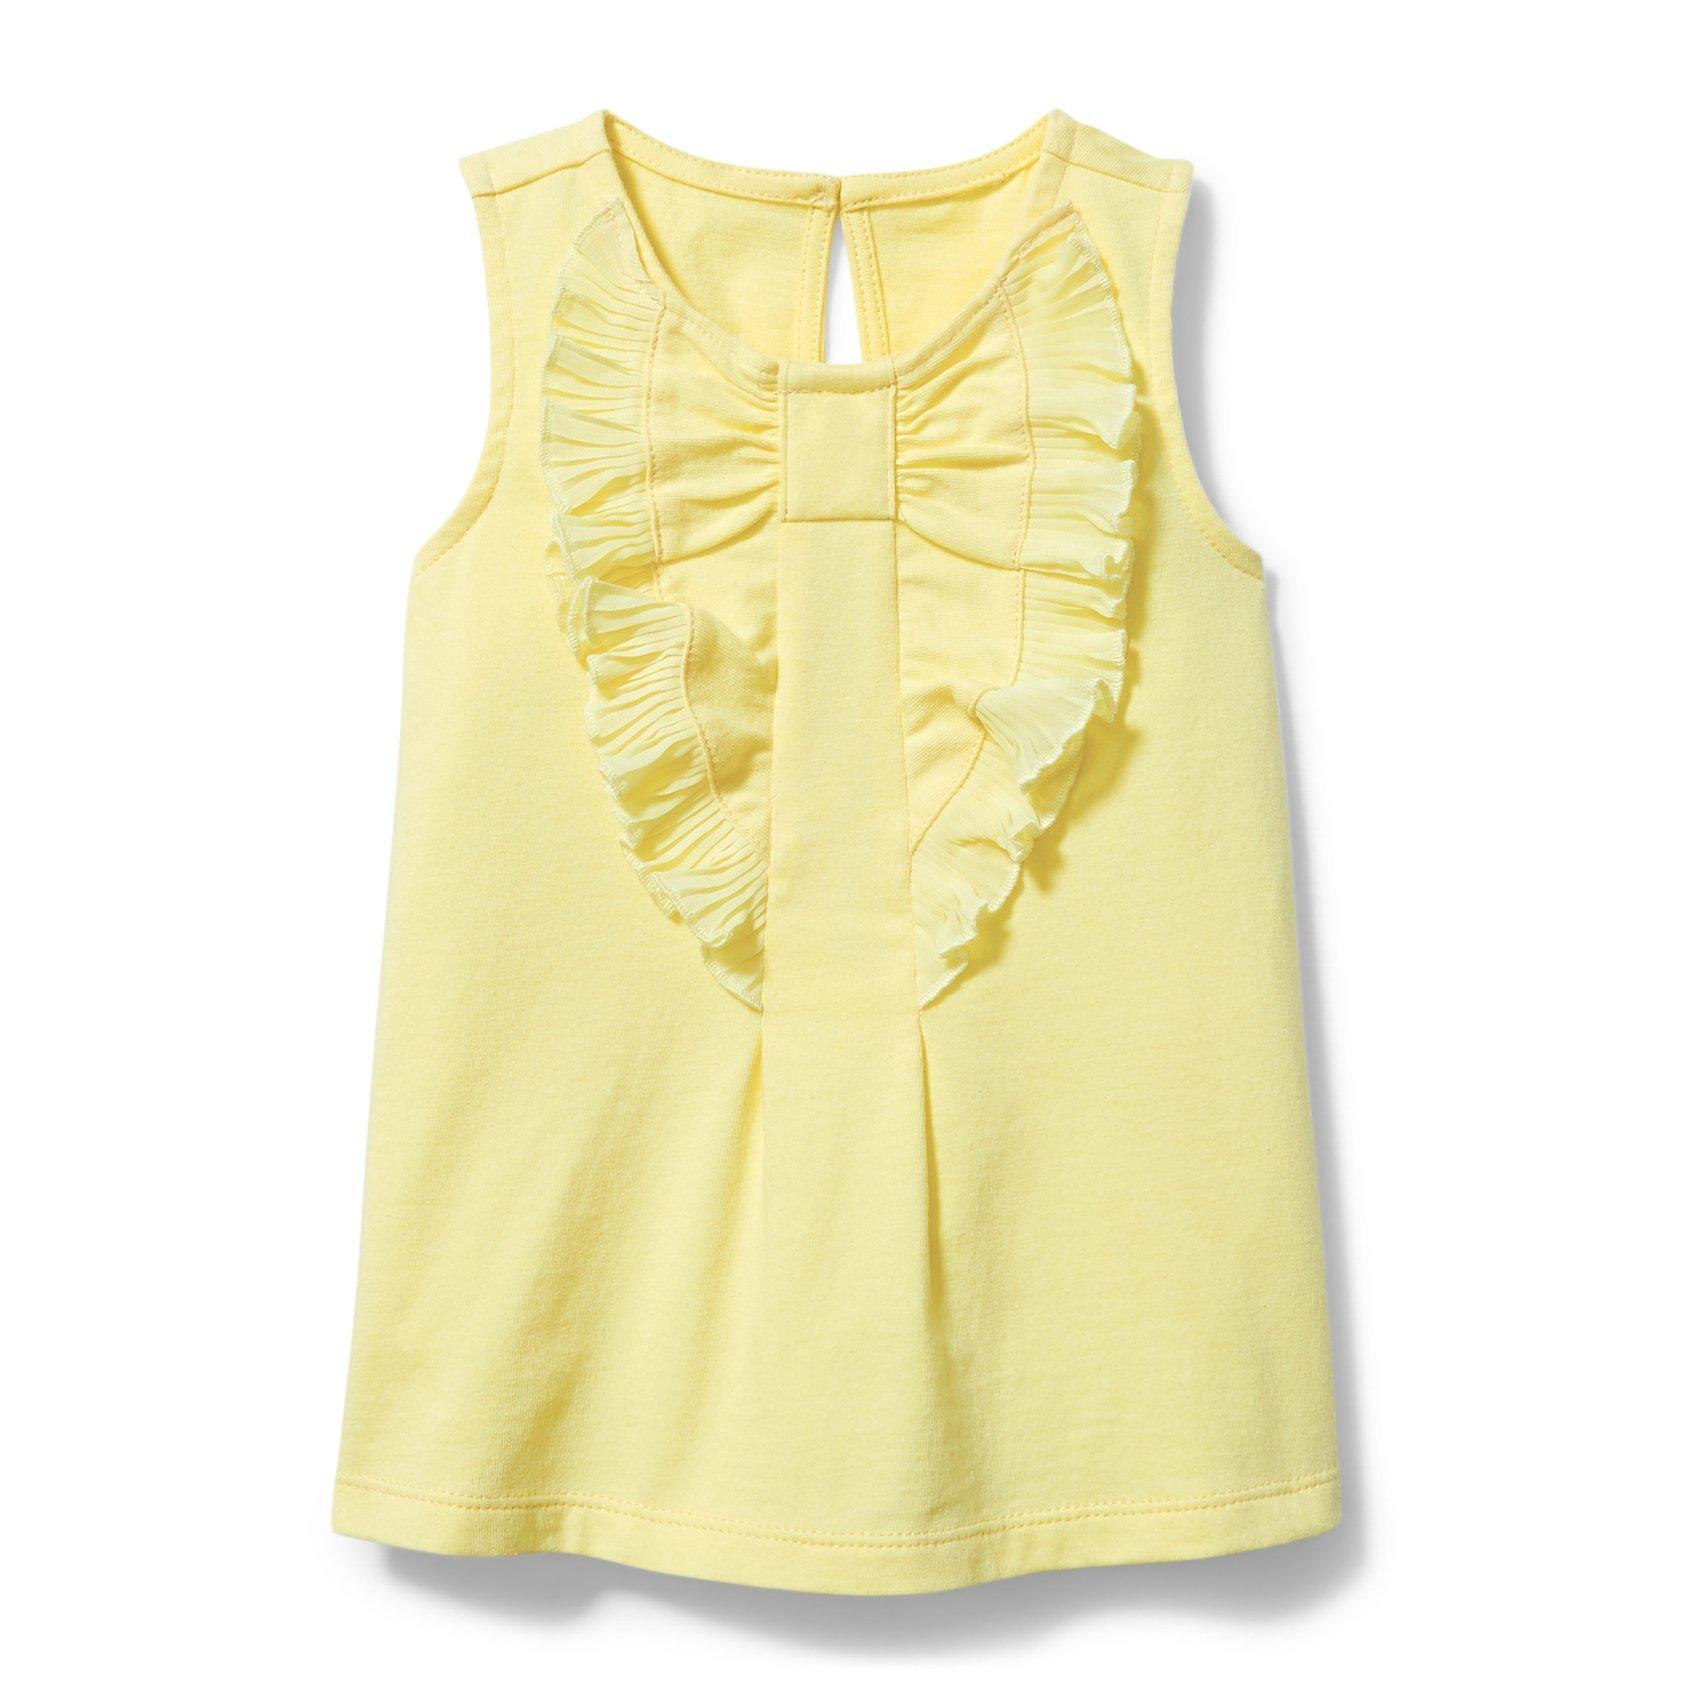 sibling matches for summer, girls yellow tank